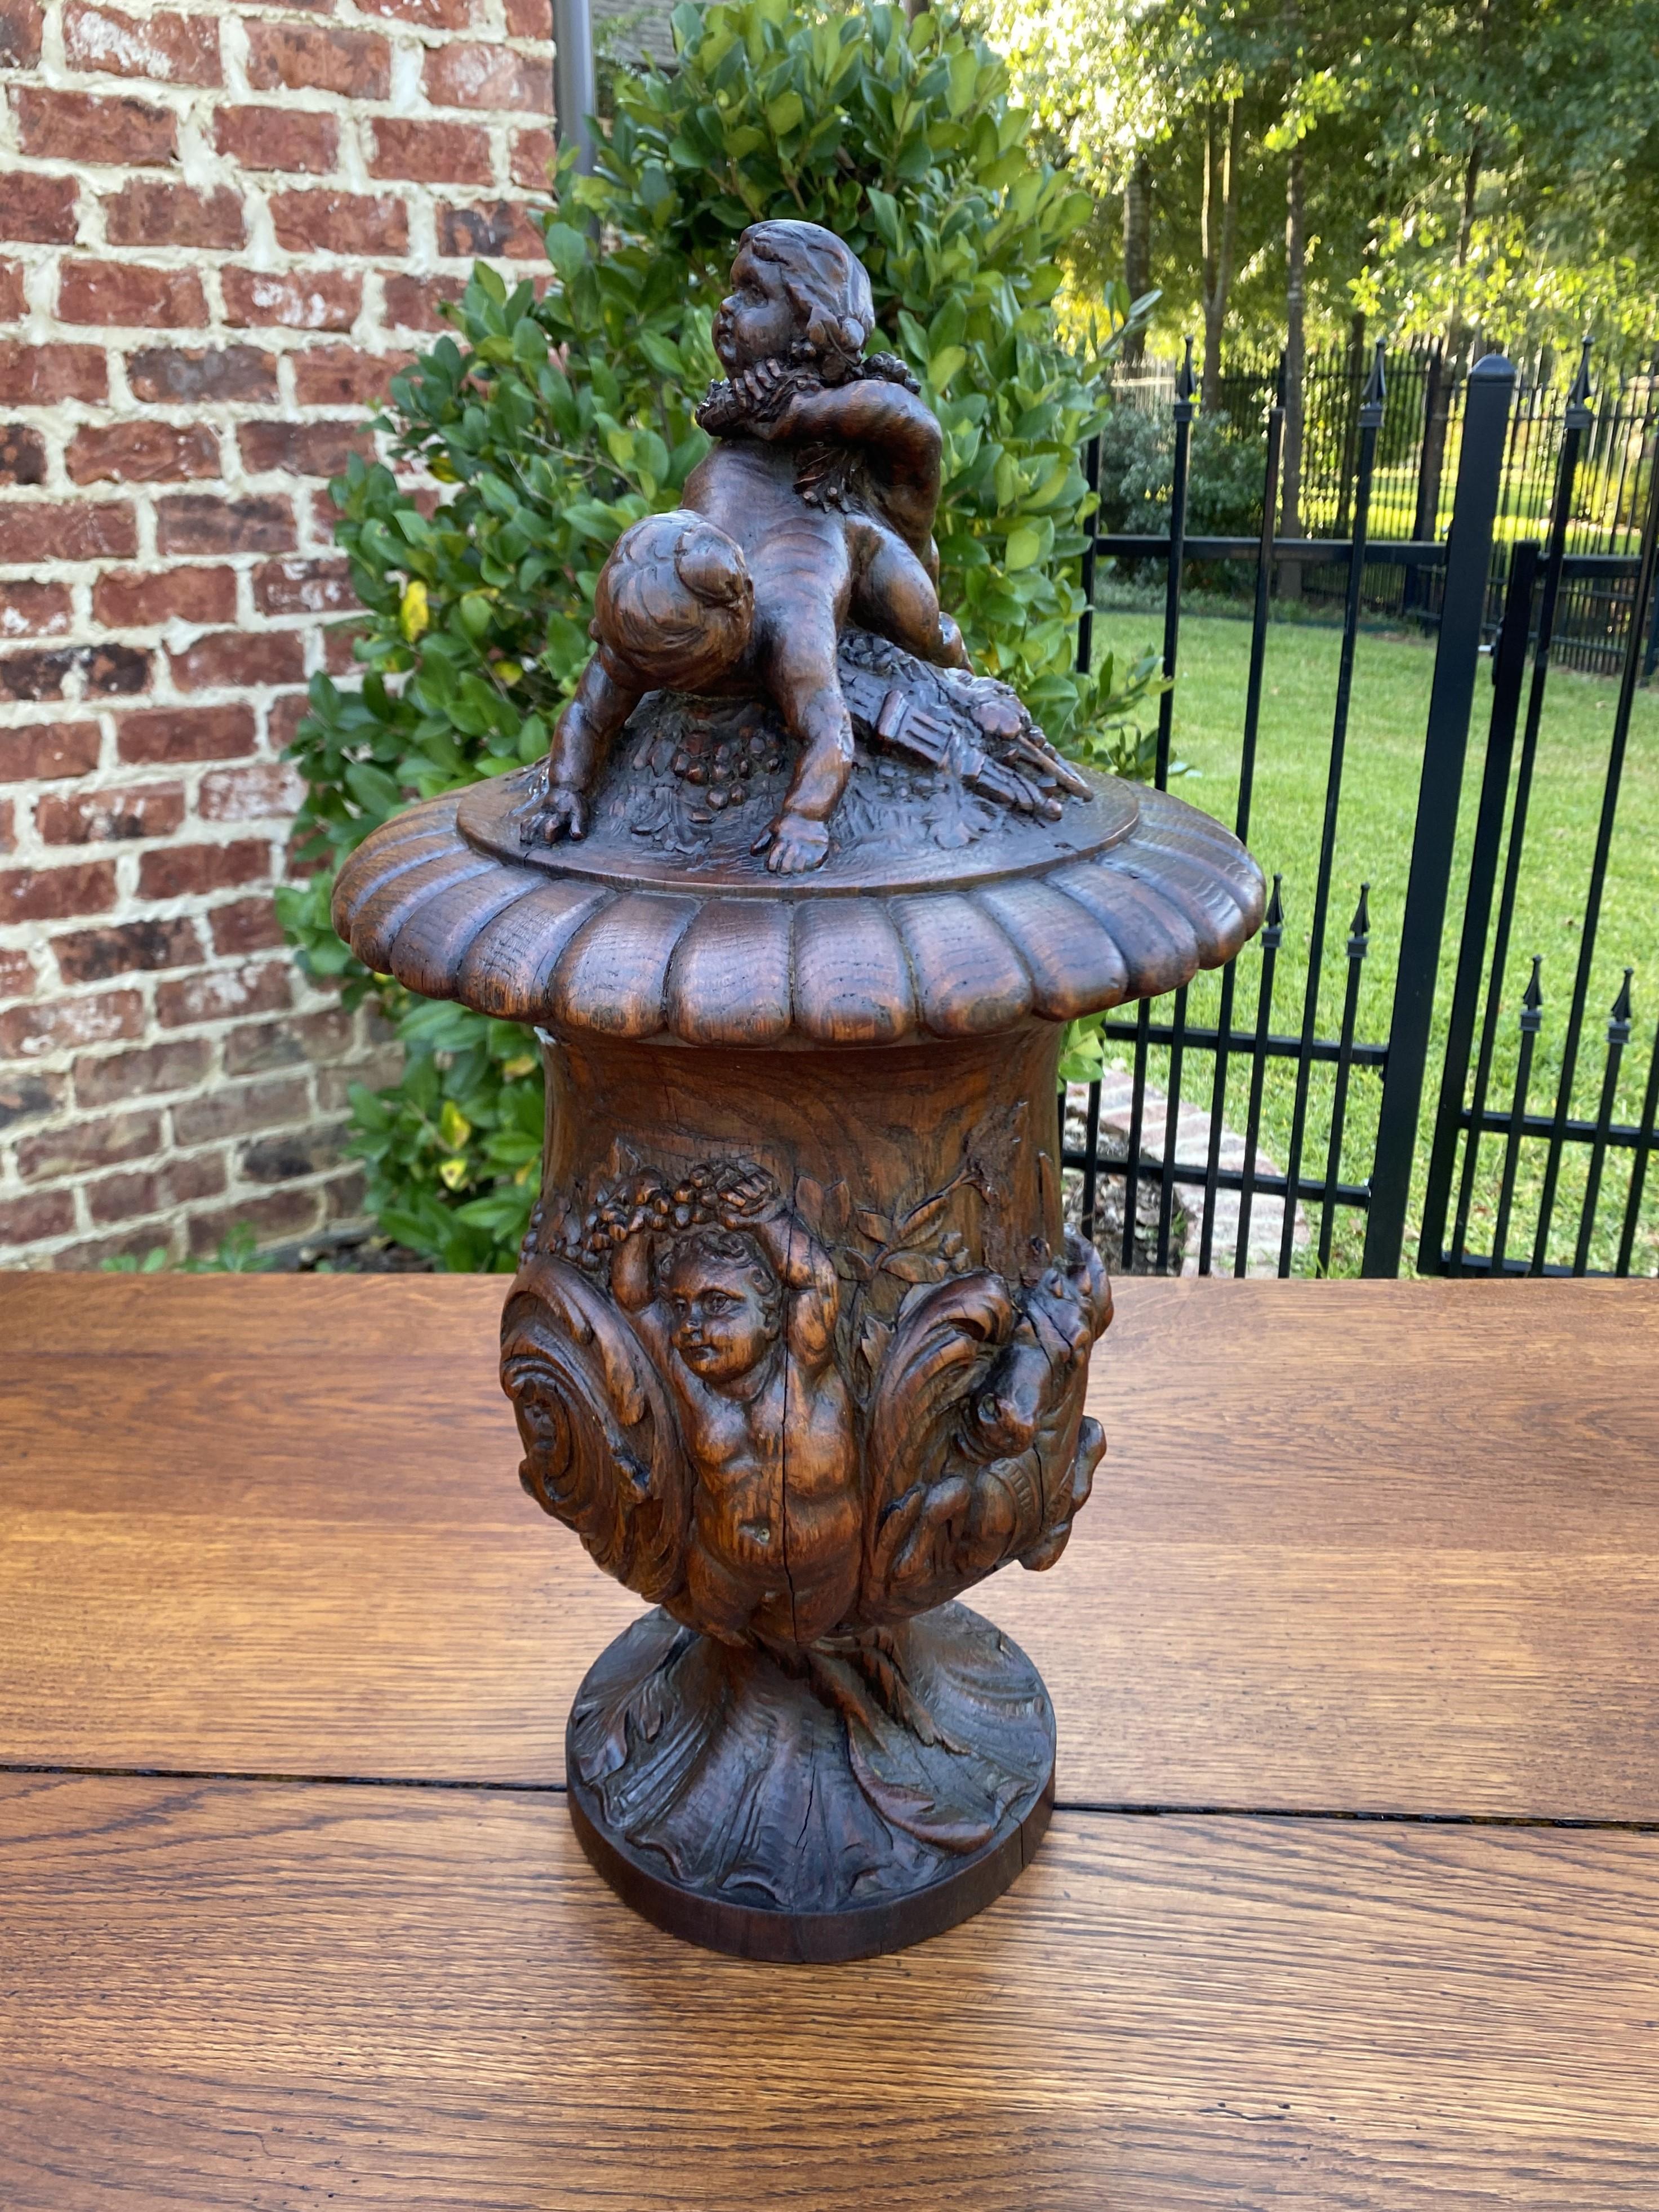 Exquisite antique French urn~~highly carved oak cherubs, putti, hippocamp and acanthus accents~~c. 1880s

A must see~~stunning hand-carved french oak urn~~affixed lid with carved cherubs and pedestal base~~rarely do we find such a gorgeous piece